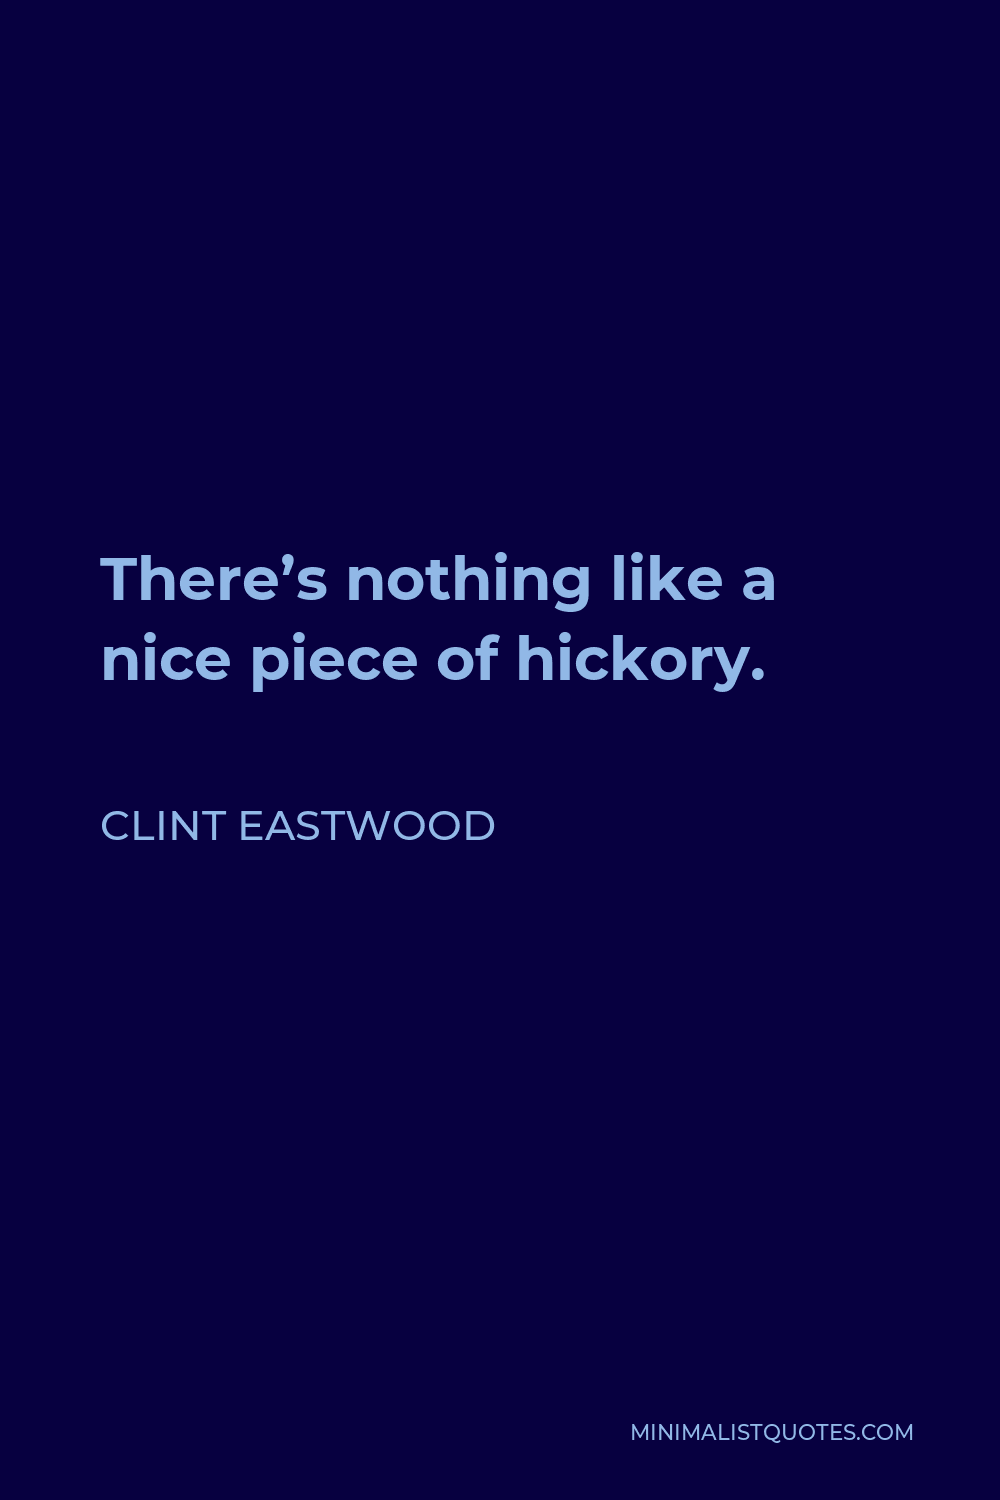 Clint Eastwood Quote - There’s nothing like a nice piece of hickory.